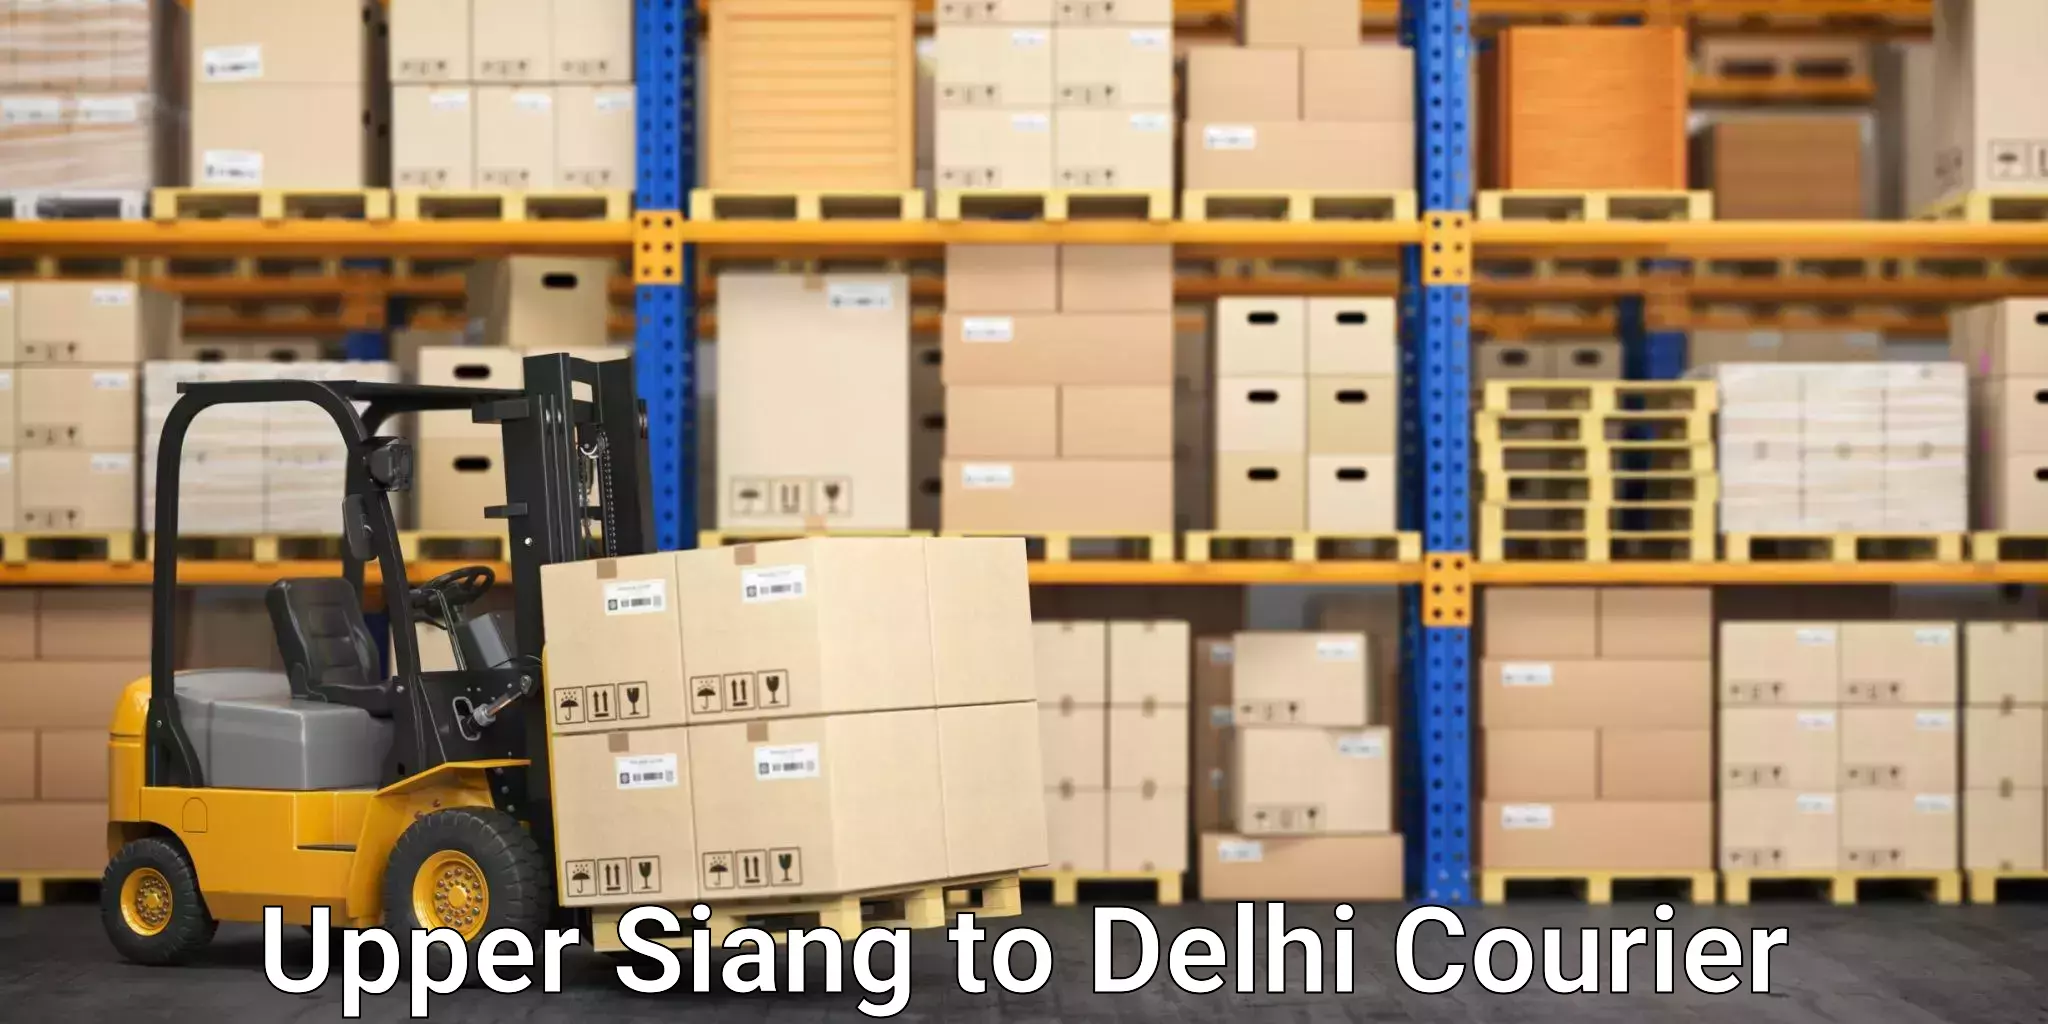 Flexible delivery scheduling in Upper Siang to Delhi